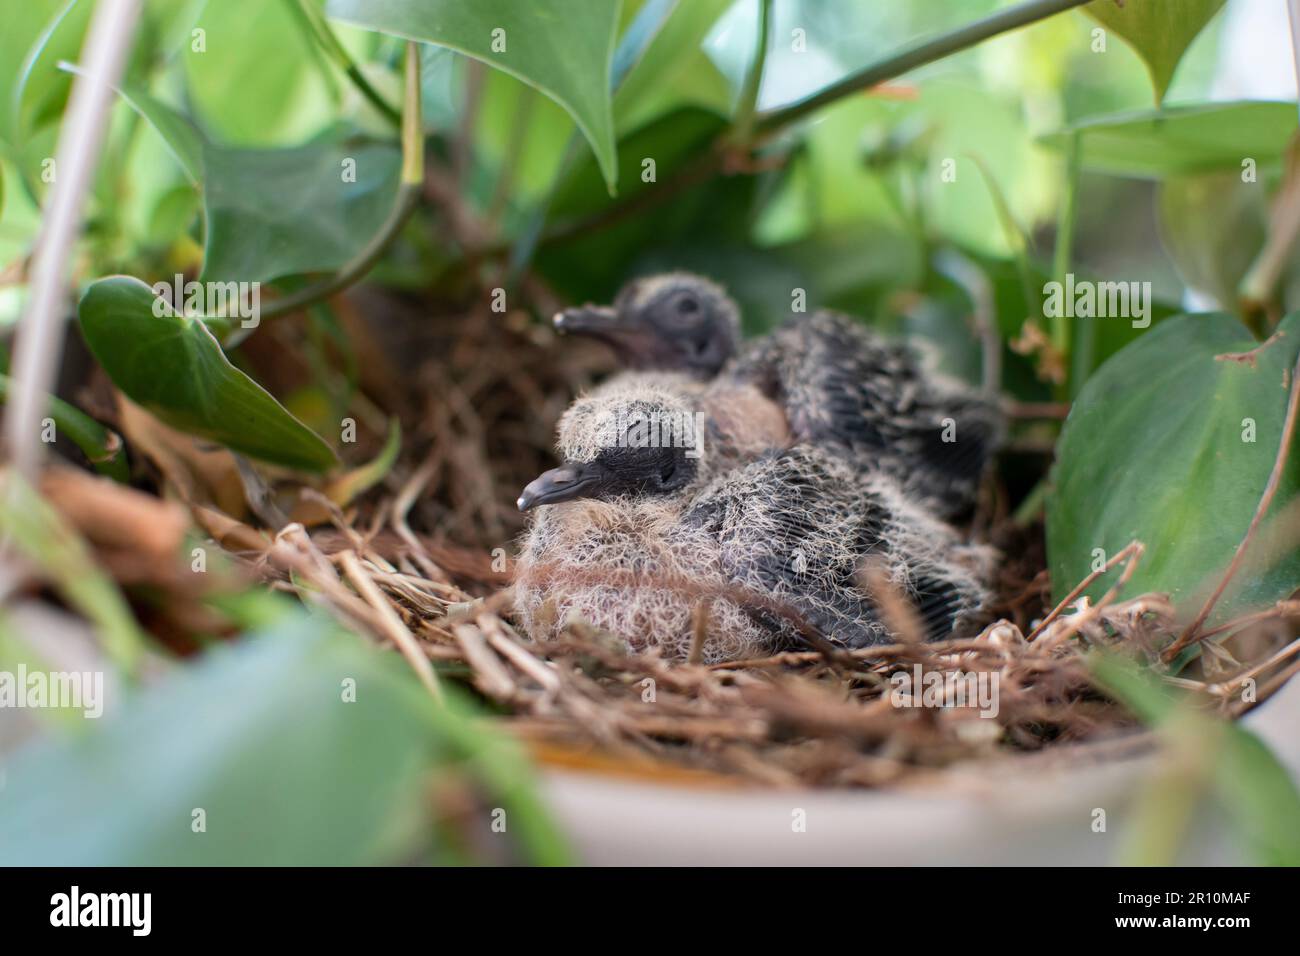 Baby birds in a nest in a hanging basket plant. Baby doves. Baby pigeons sleeping in their nest Stock Photo